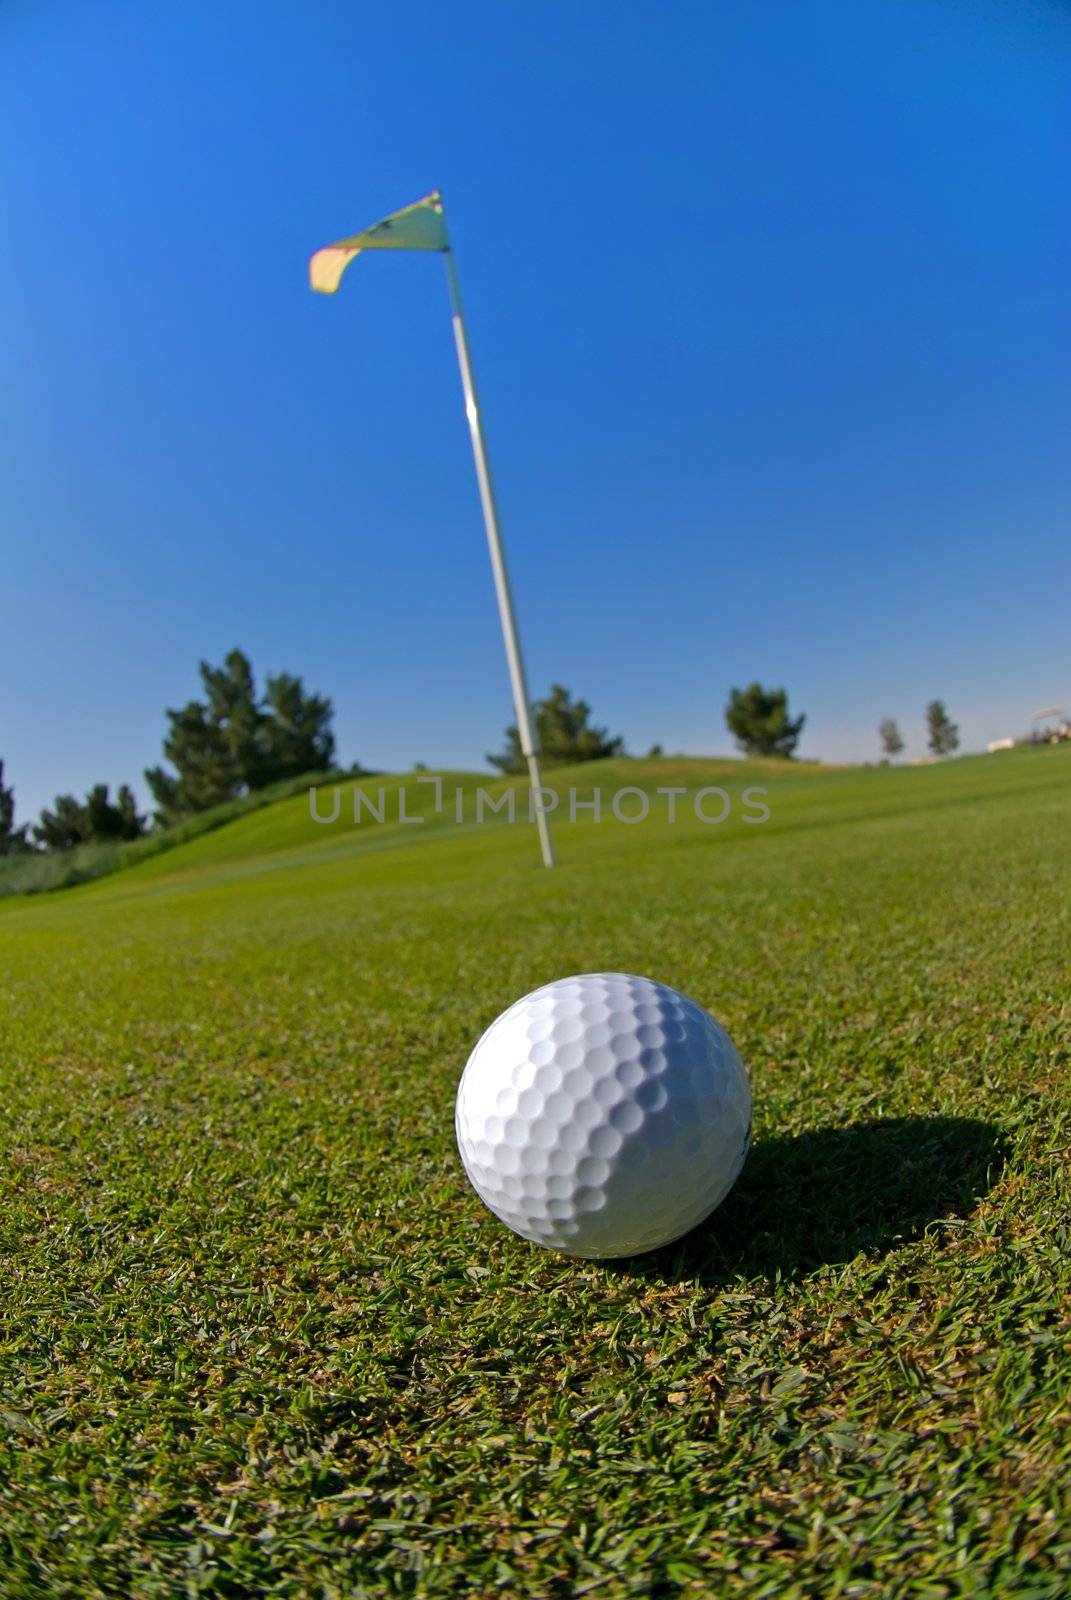 Image of a golf ball on green